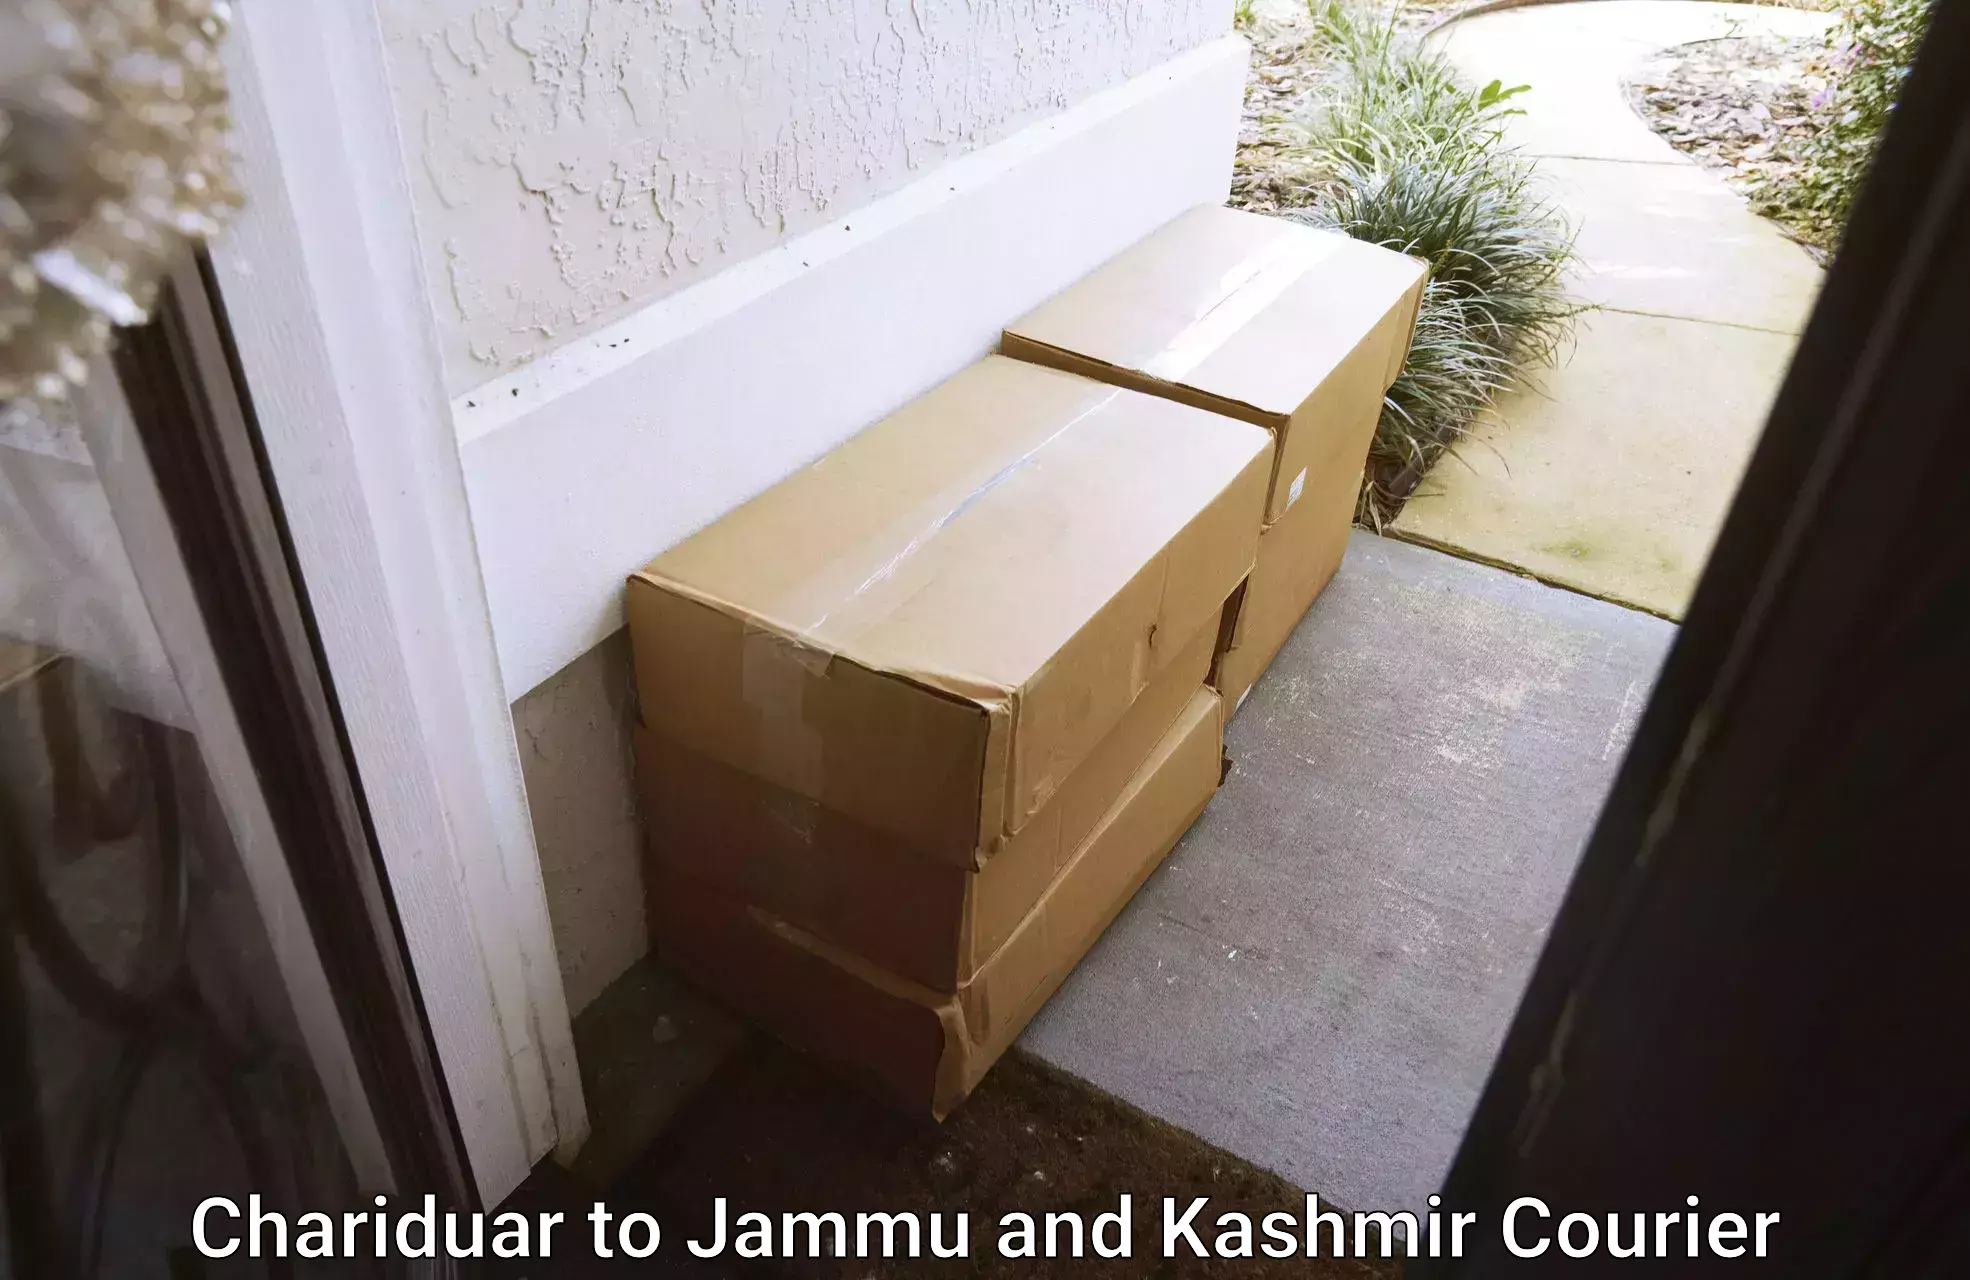 Full-service courier options Chariduar to Bhaderwah